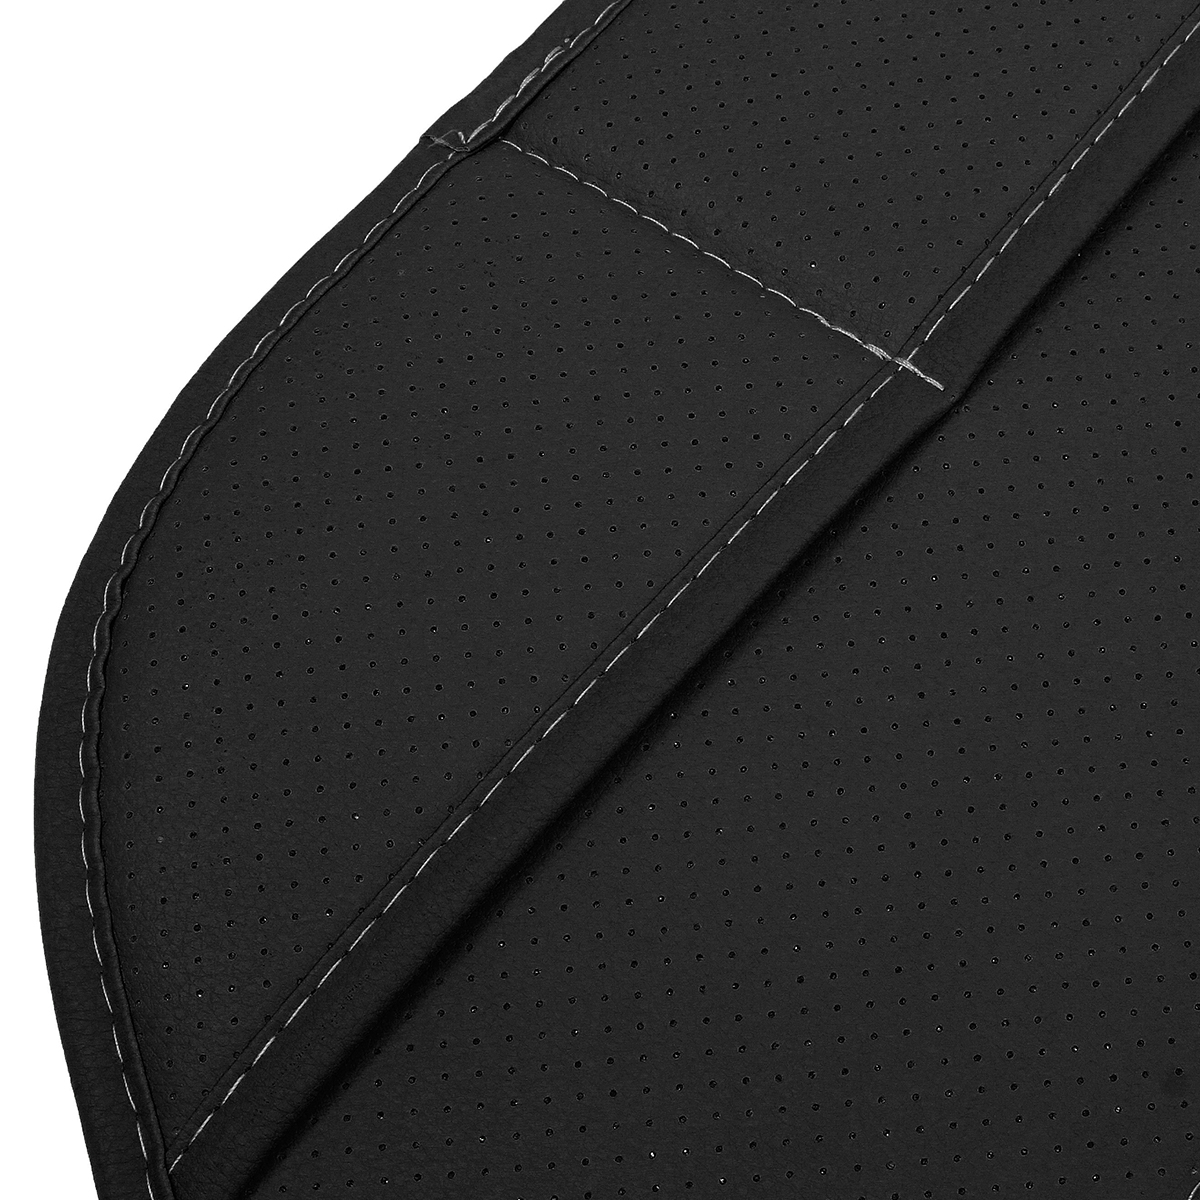 125X50Cm PU Leather Car Seat Cushion Cover Chair Protector Mat Pad Universal - Auto GoShop